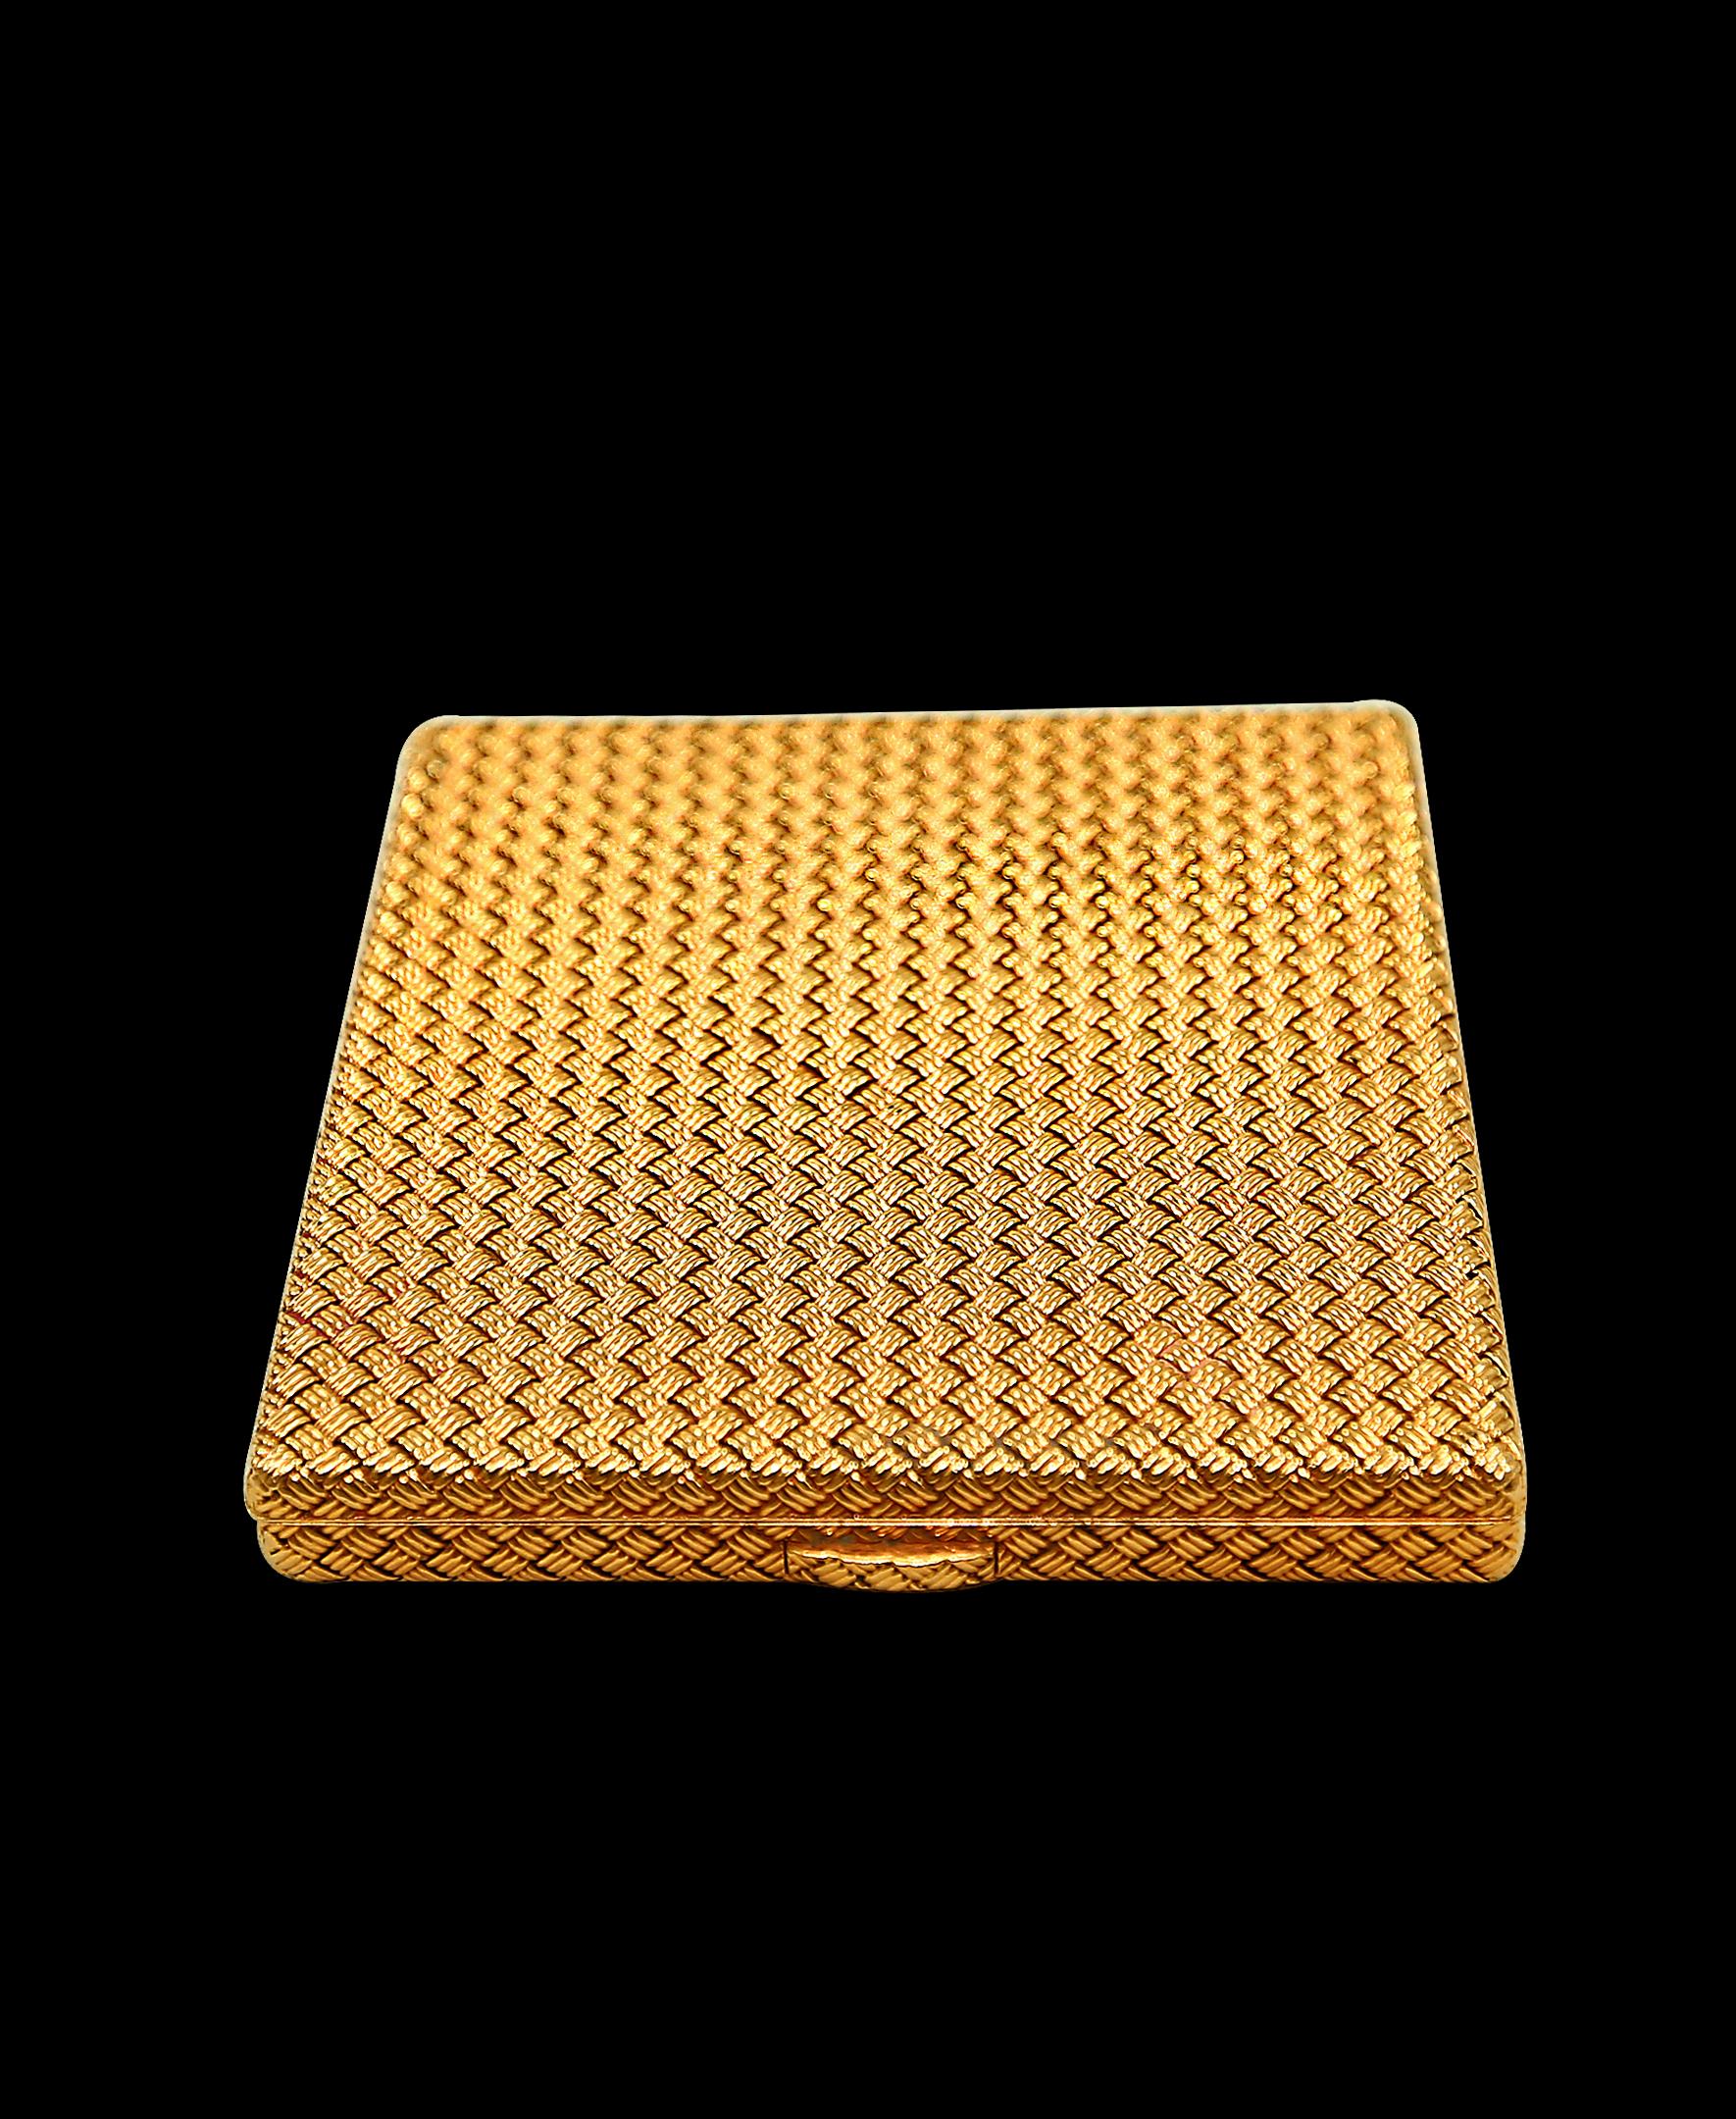 Vintage 18K yellow gold Van Cleef & Arpels compact powder box with a woven texture and original black leather case. Circa 1960's. Signed Van Cleef & Arpels with the number which i can not read but i have added a picture. I think it read RV52-1 The